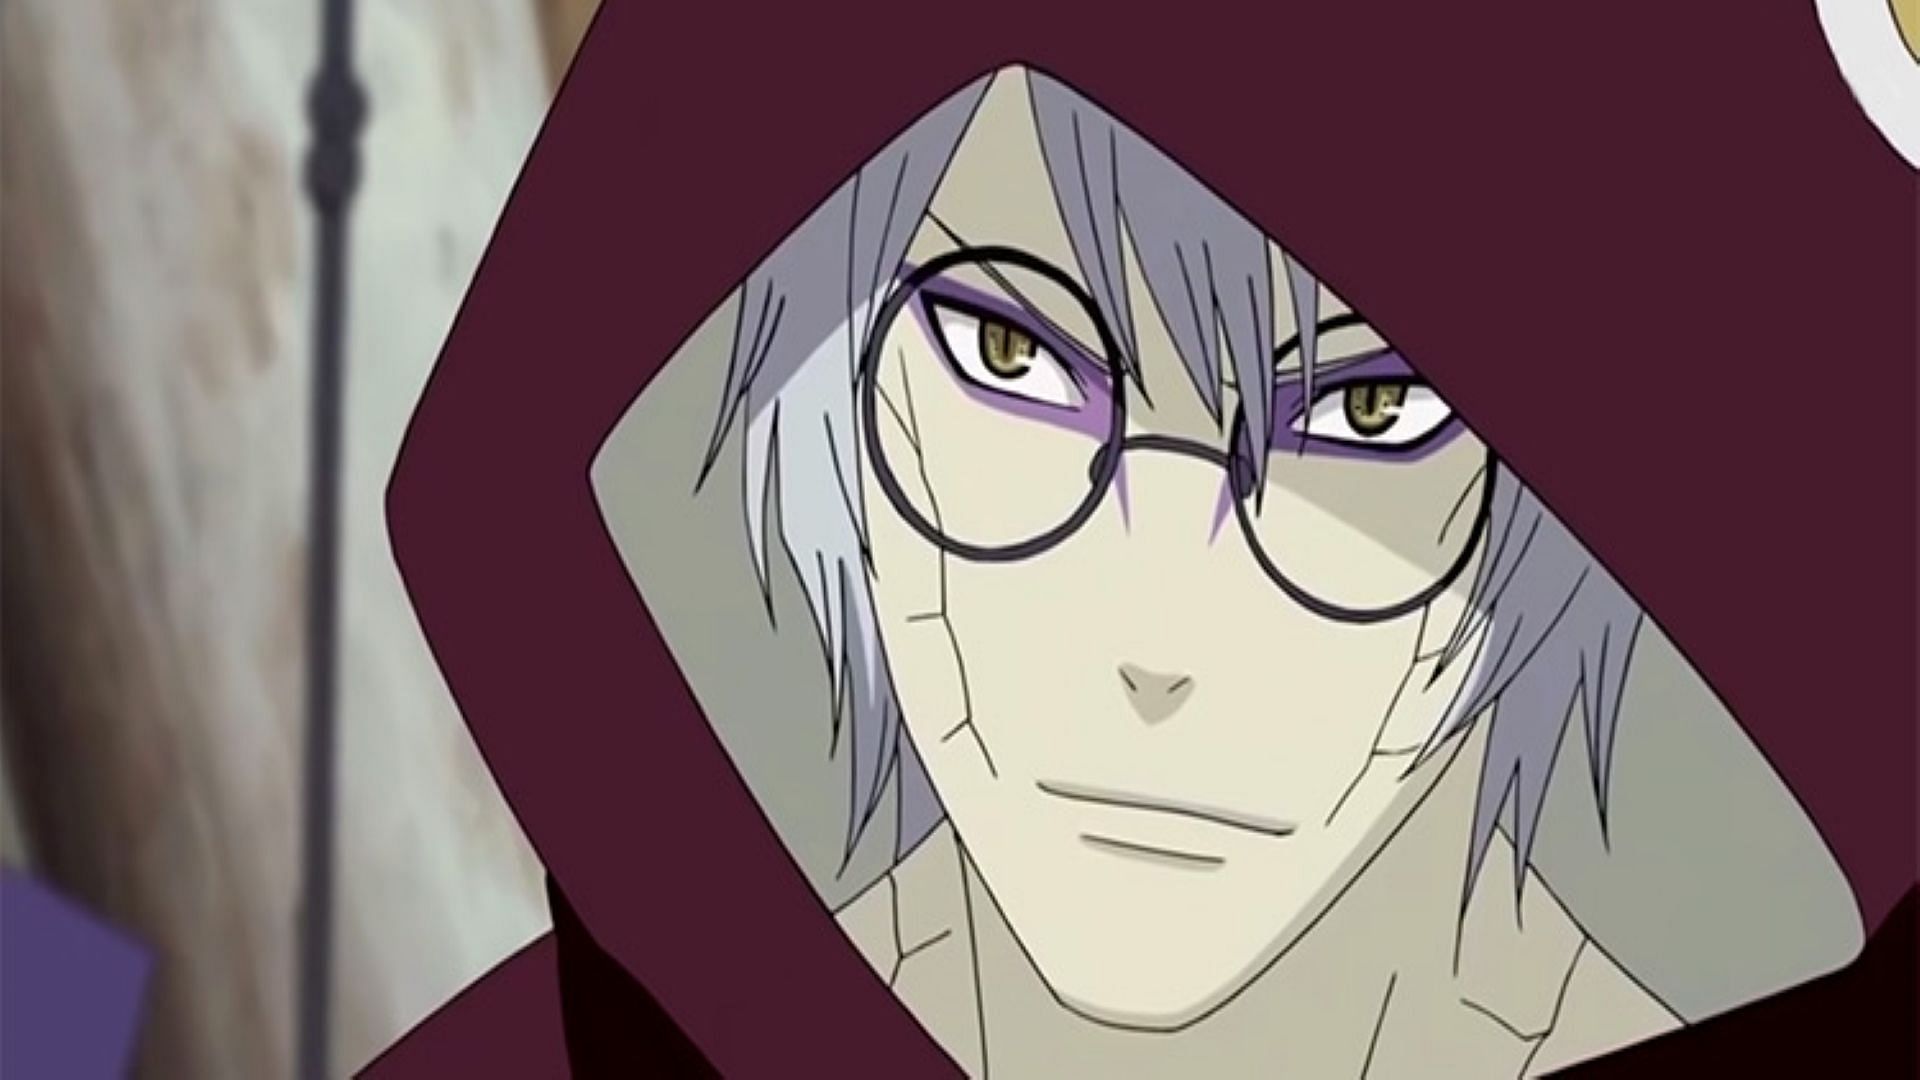 Kabuto is one of the most evil characters in Naruto (Image via Studio Pierrot)